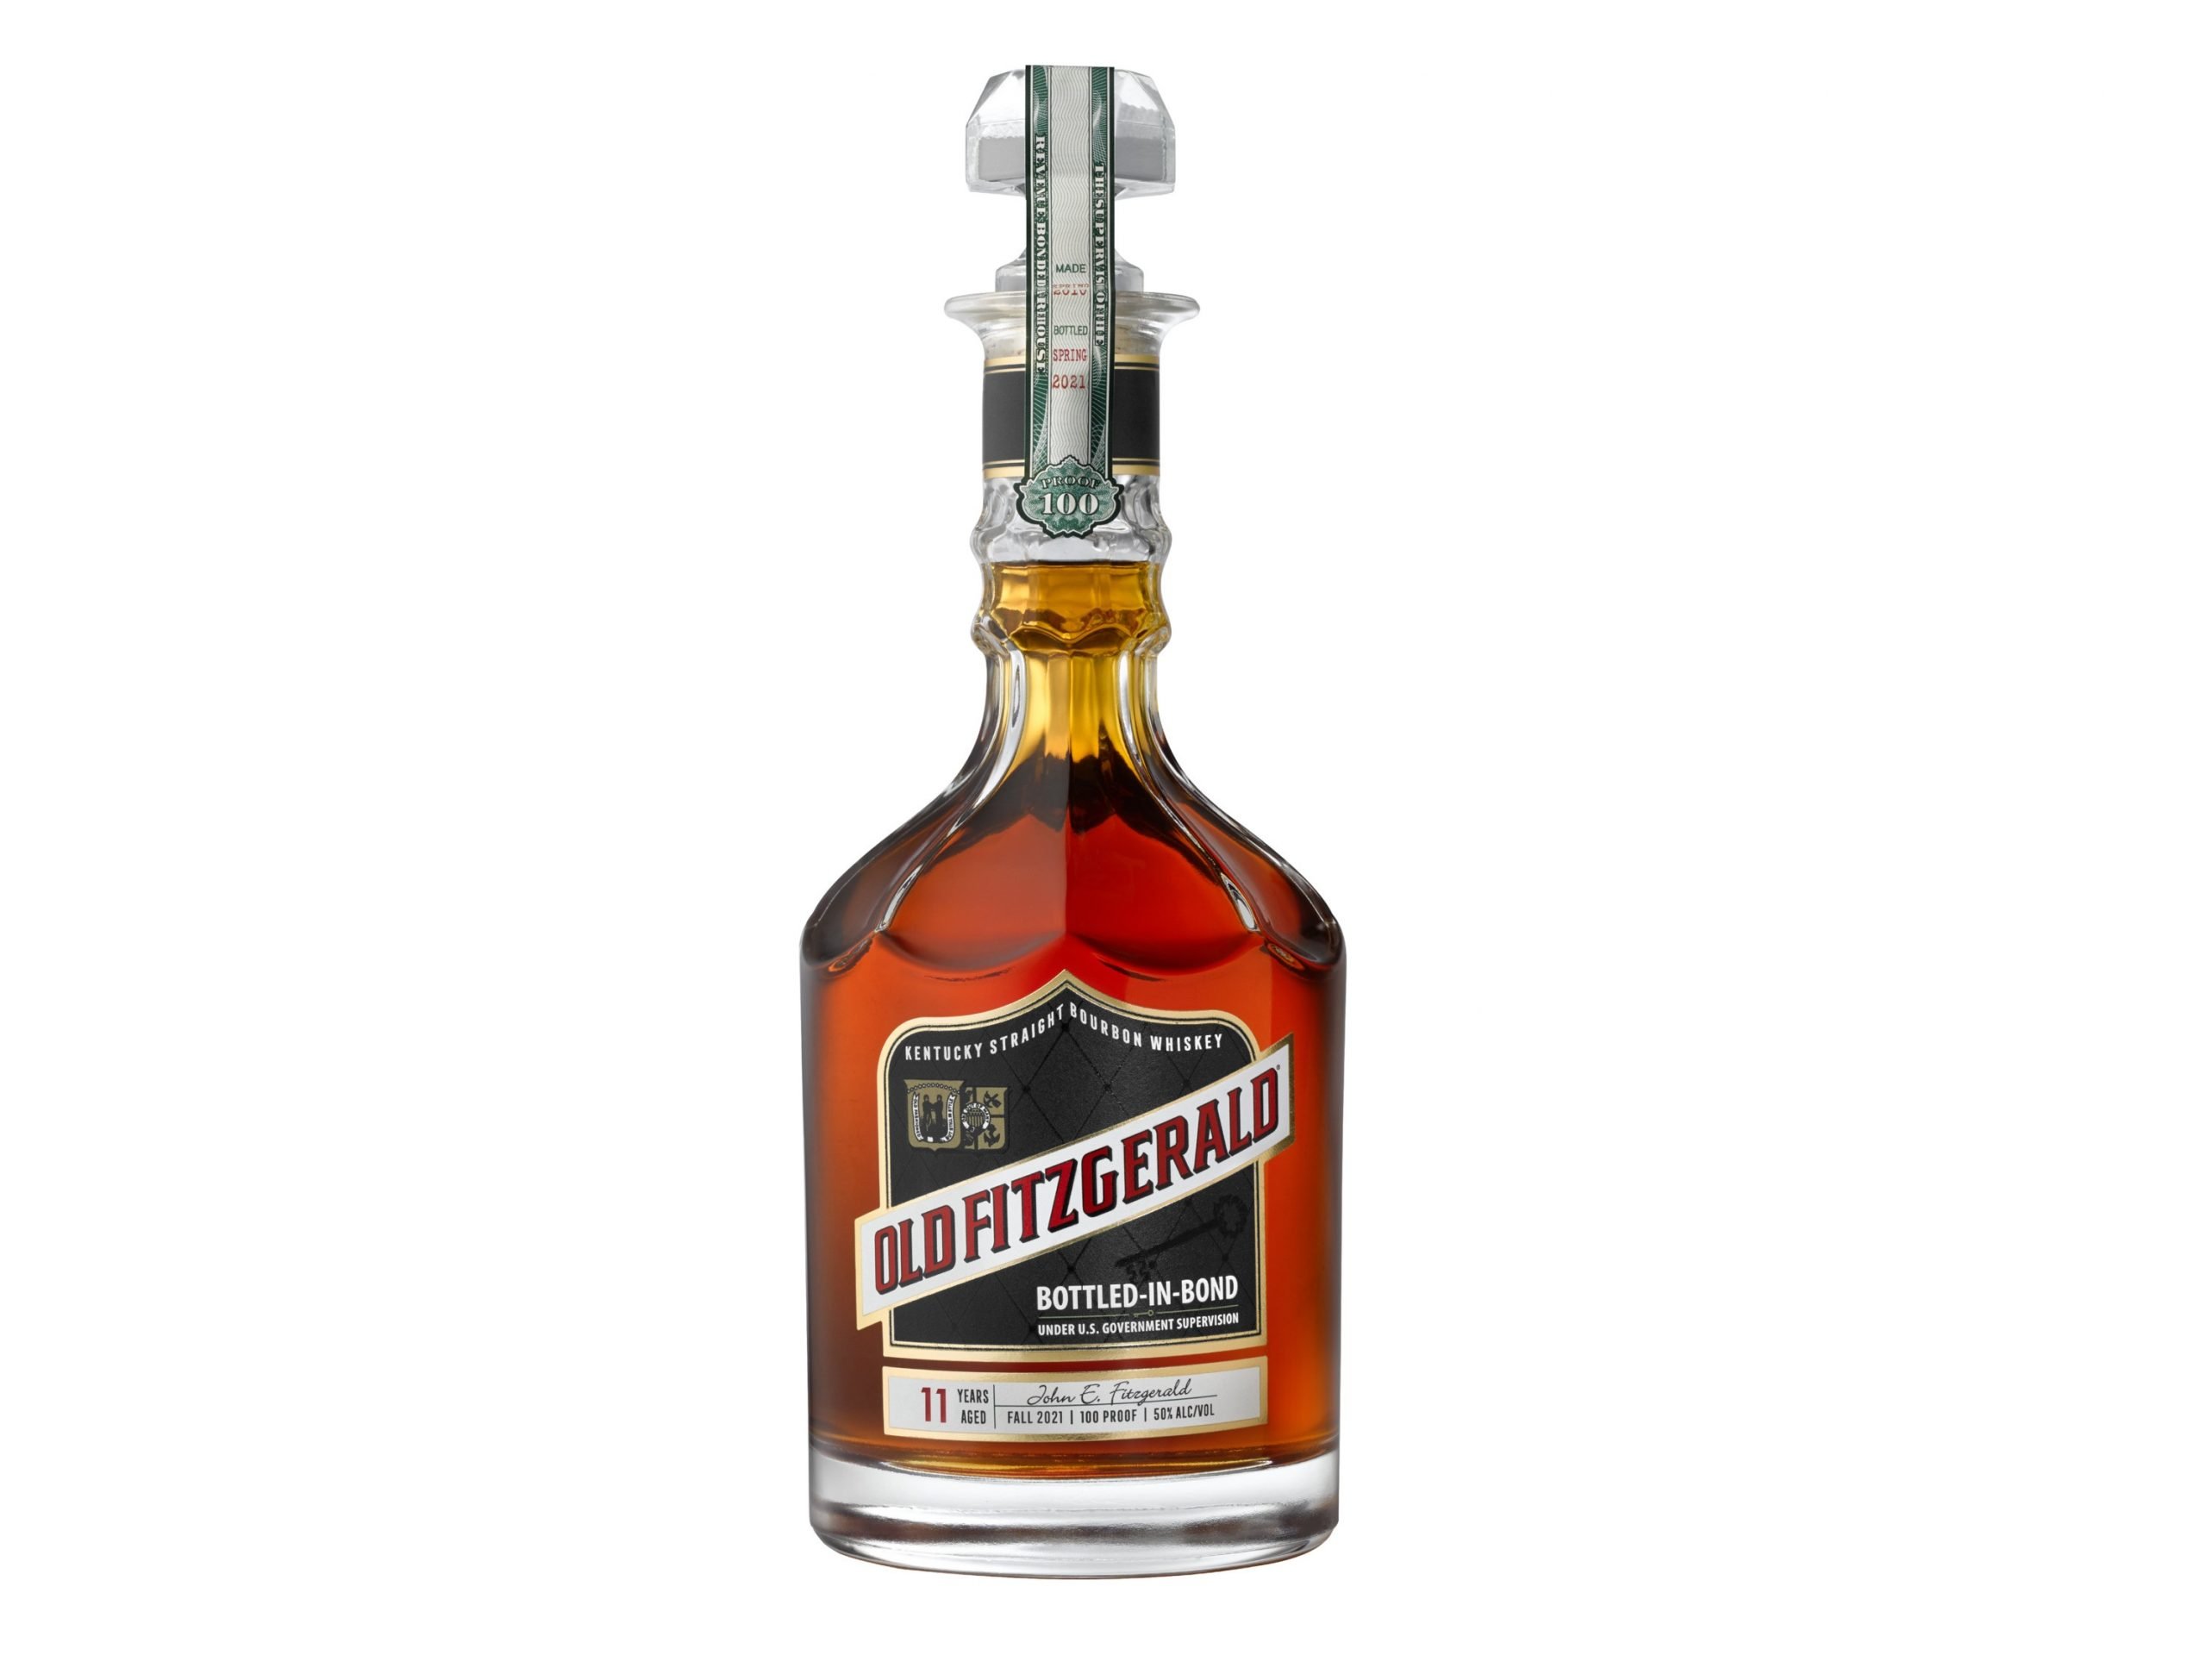 Old Fitzgerald Bottled-in-Bond 19 Years Old Fall 2022 Edition